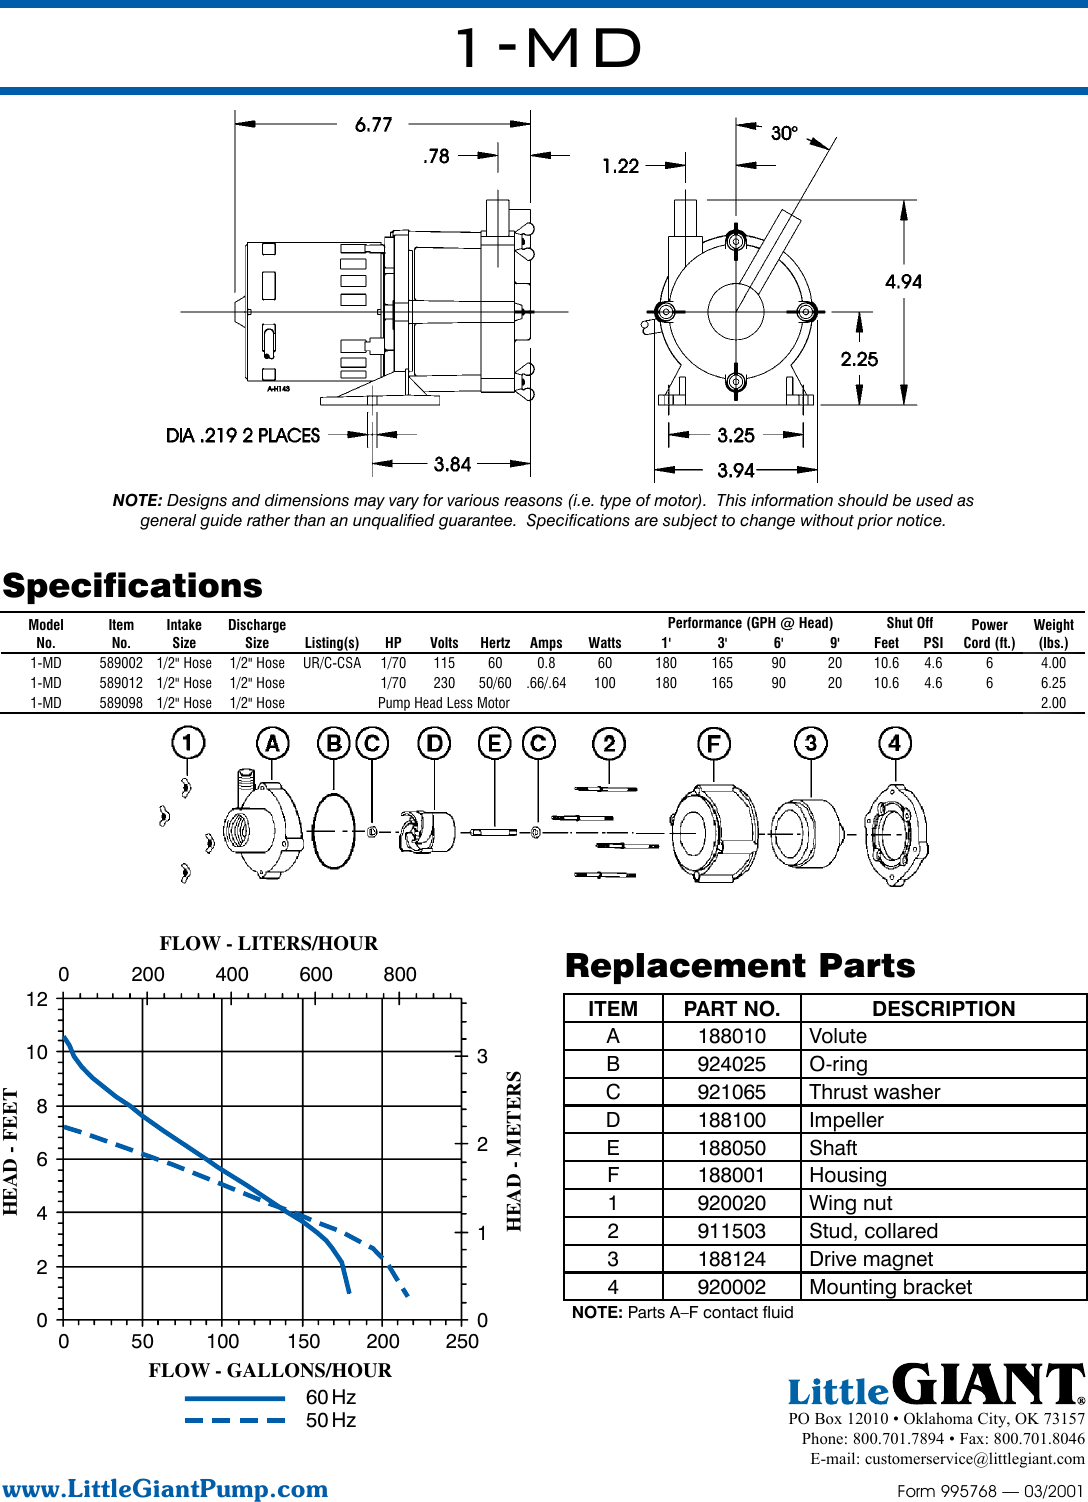 Page 2 of 2 - 539543 1 Little Giant 1-MD Magnetic Drive Pump Specs Sheet